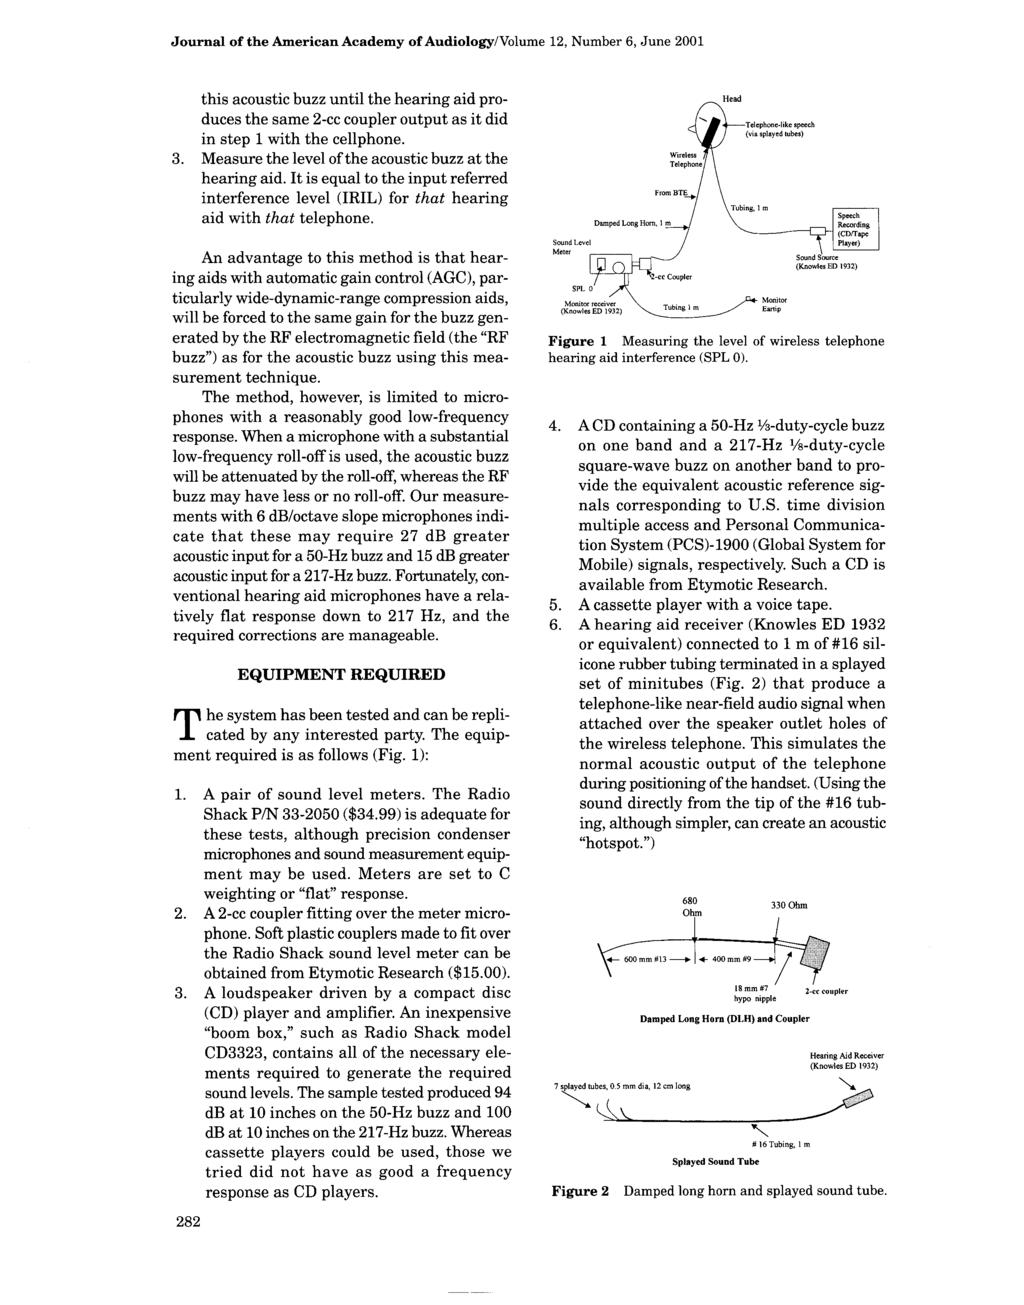 Journal of the American Academy of Audiology/Volume 12, Number 6, June 2001 this acoustic buzz until the hearing aid produces the same 2-cc coupler output as it did in step 1 with the cellphone. 3.